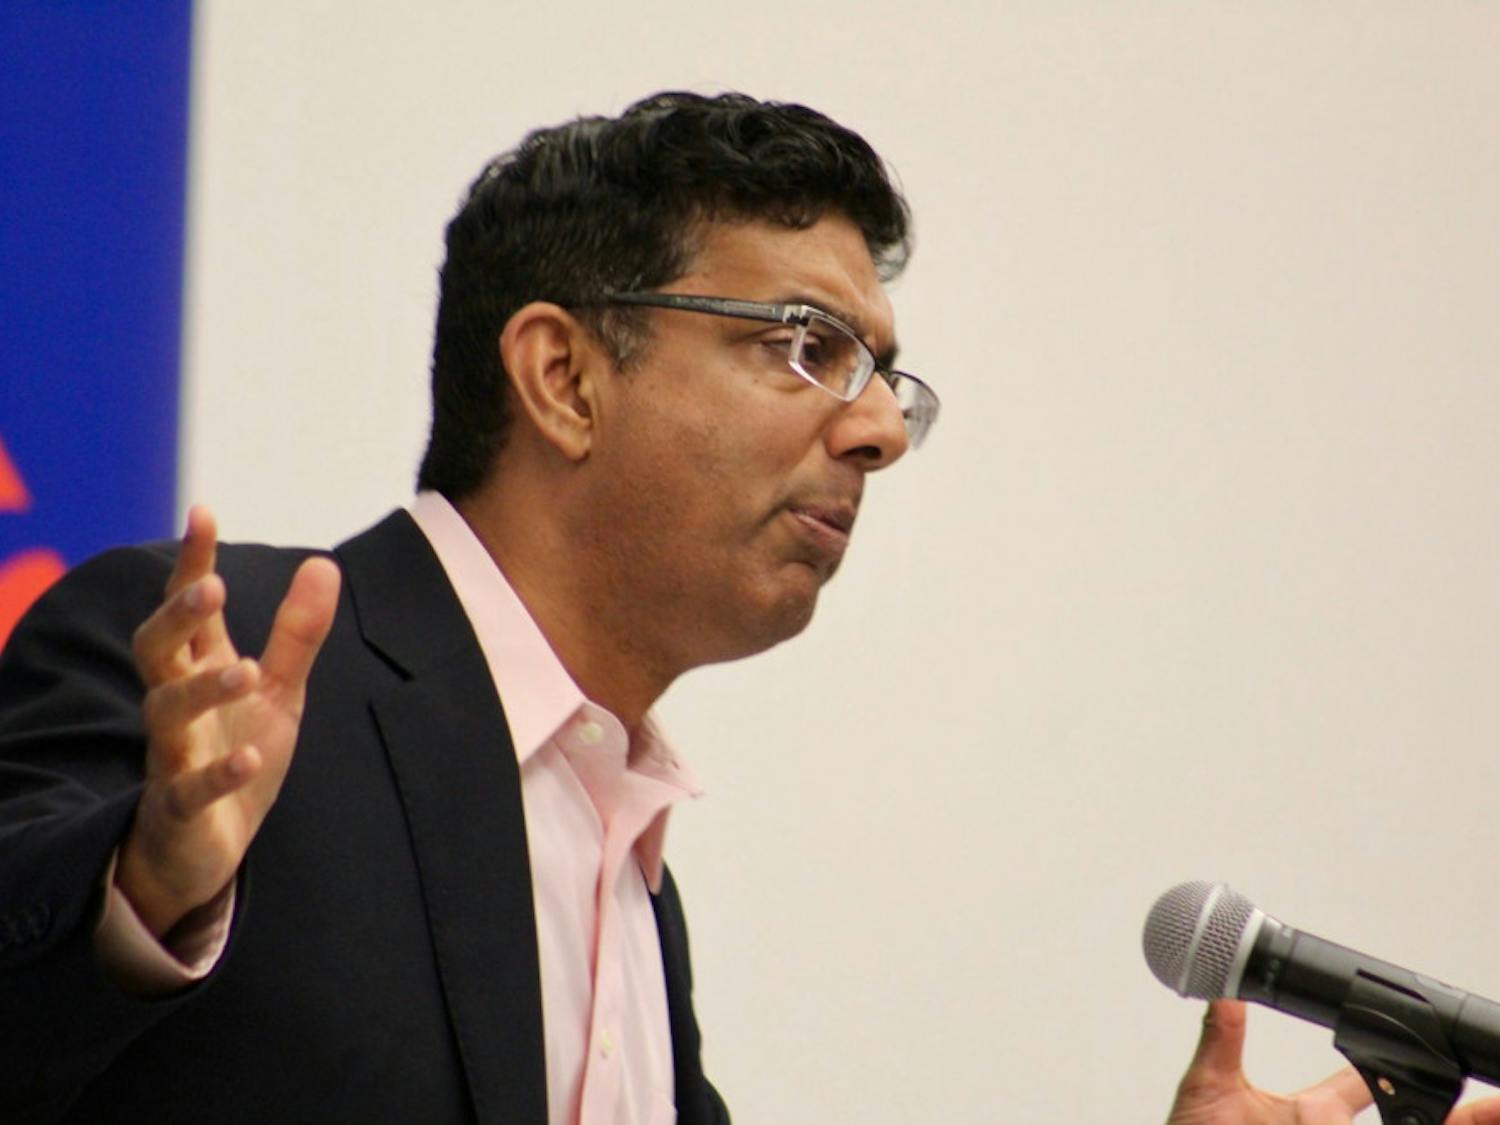 Dinesh D'Souza did not shy away from hard political topics and primarily talked about the differences between the Democratic and Republican Parties that have dominated American politics.
&nbsp;